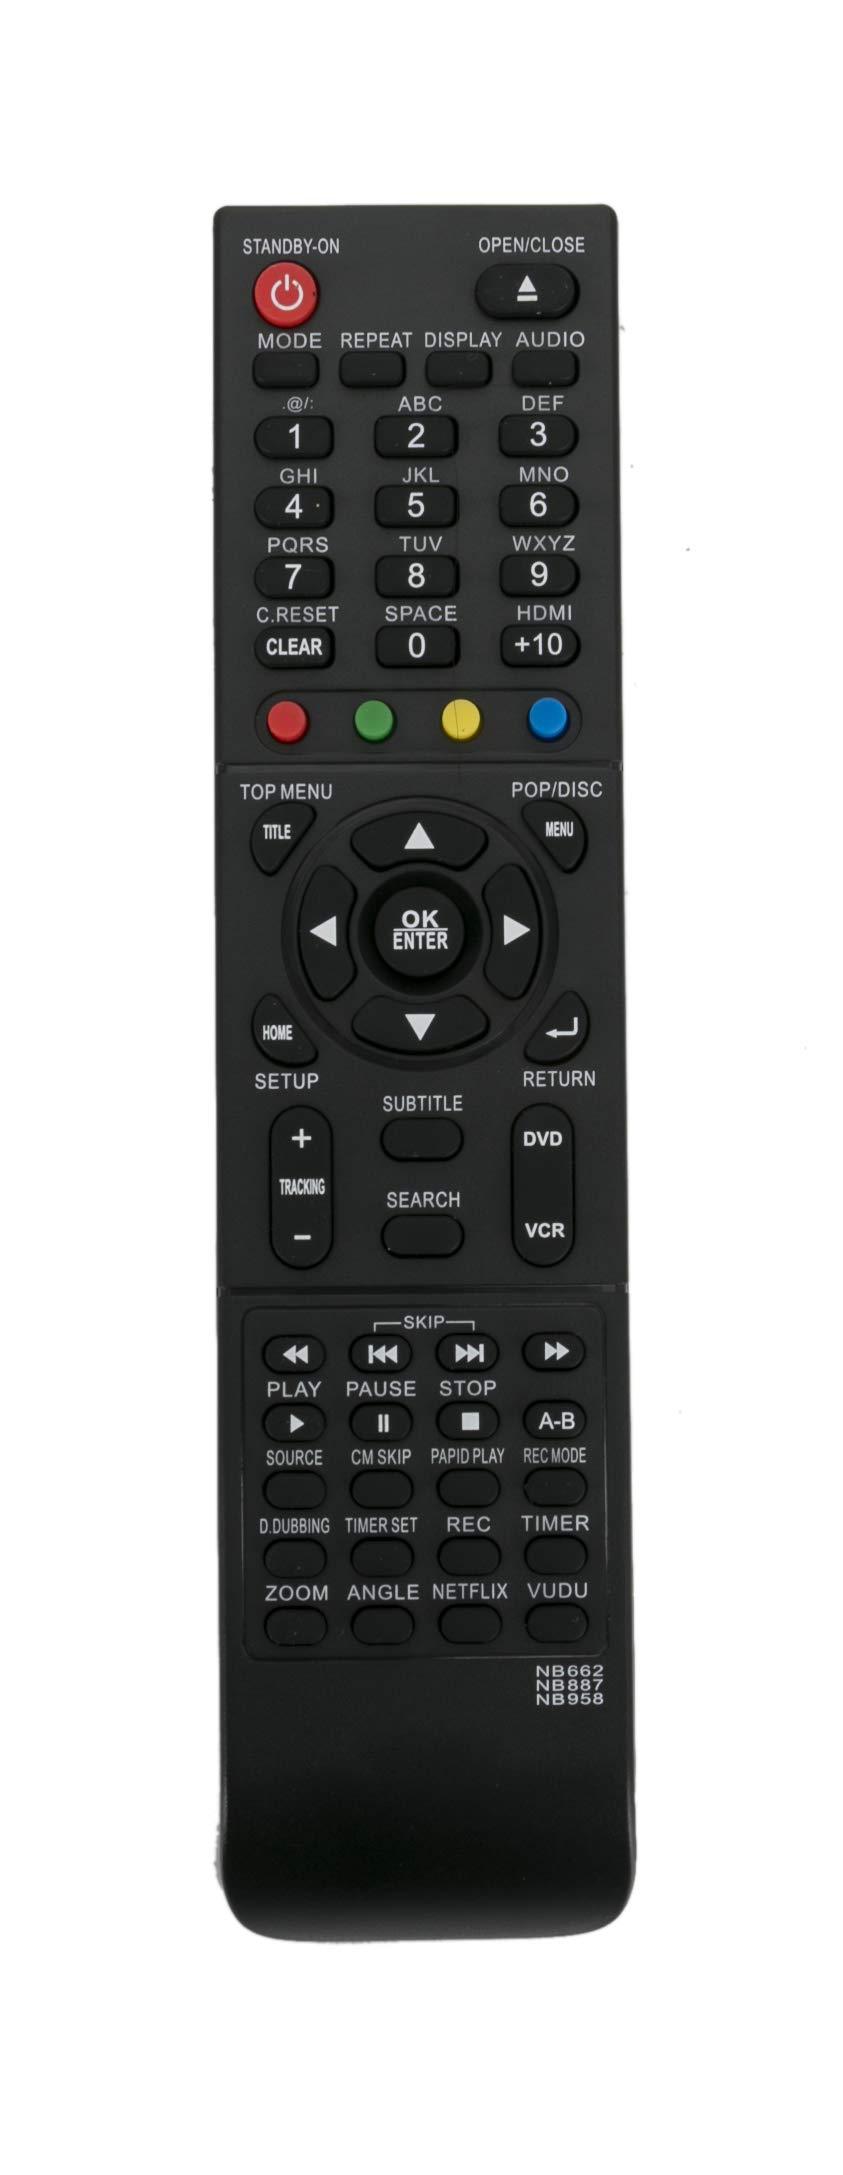 New Remote Control NB662 NB887 NB958 fit for MAGNAVOX DVD VCR RZV427MG9A ZV427MG9 DV200MW8 DV200MW8A RZV427MG9 ZV427MG9A MBP5210 MBP5210F MBP5210FF7 MBP5220F NB887UD NB958UD MBP5210/F7 MBP5220F/F7